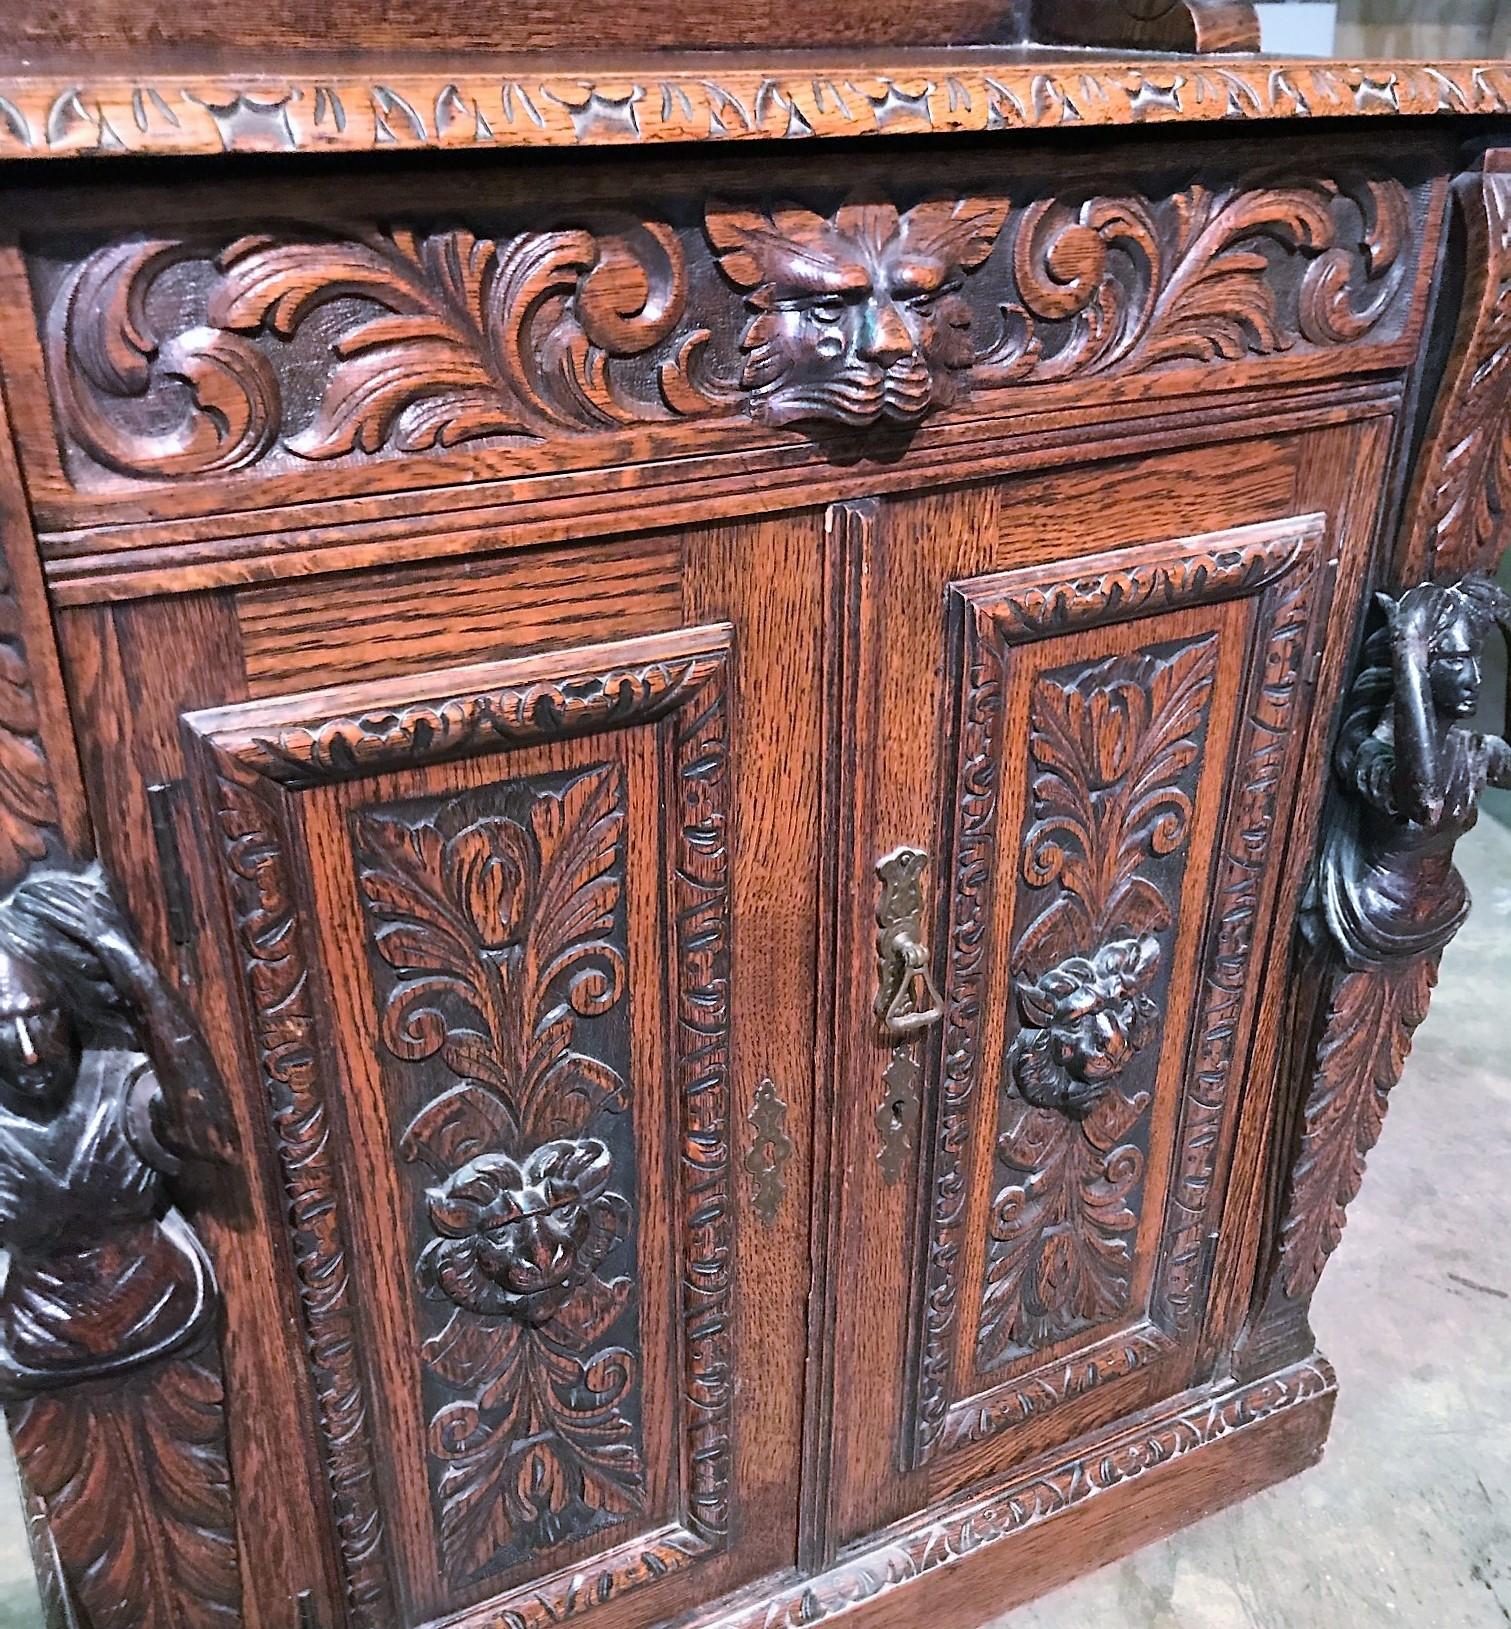 Fine quality 19th century English Jacobean style oak cabinet. The carved cornice above an inset mirror and shelf flanked by figural columns in haut-relief and accented with acanthus leaves. Possessing lion's masque carvings and complementing figural